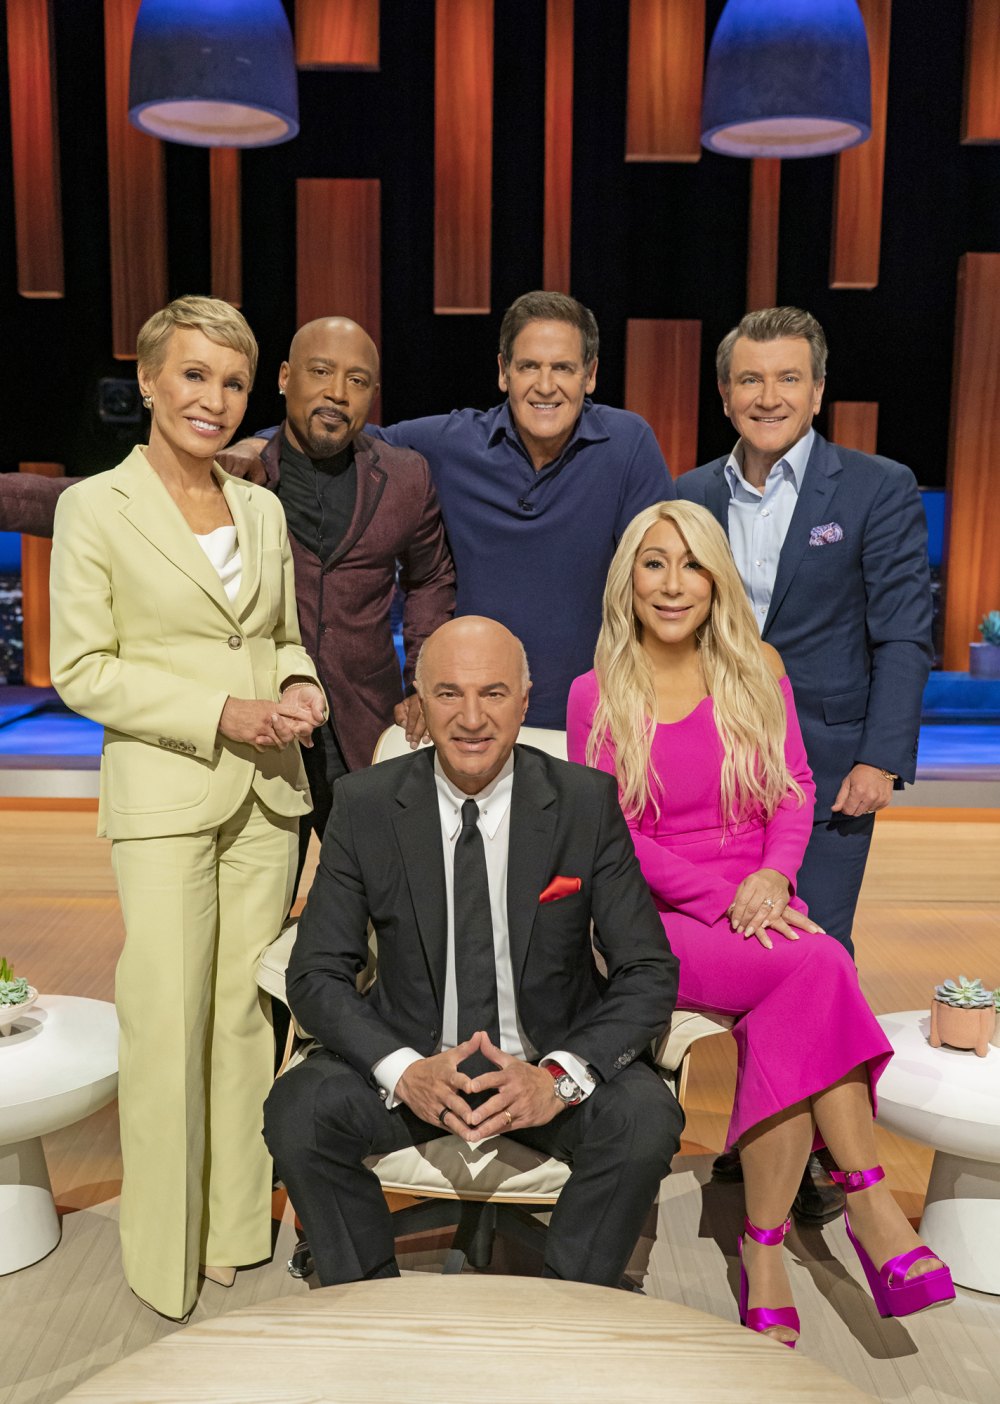 https://www.usmagazine.com/wp-content/uploads/2023/09/Kevin-O-Leary-Says-He-Was-Cast-on-Shark-Tank-For-Being-an-A-Hole-2.jpg?w=1000&quality=86&strip=all